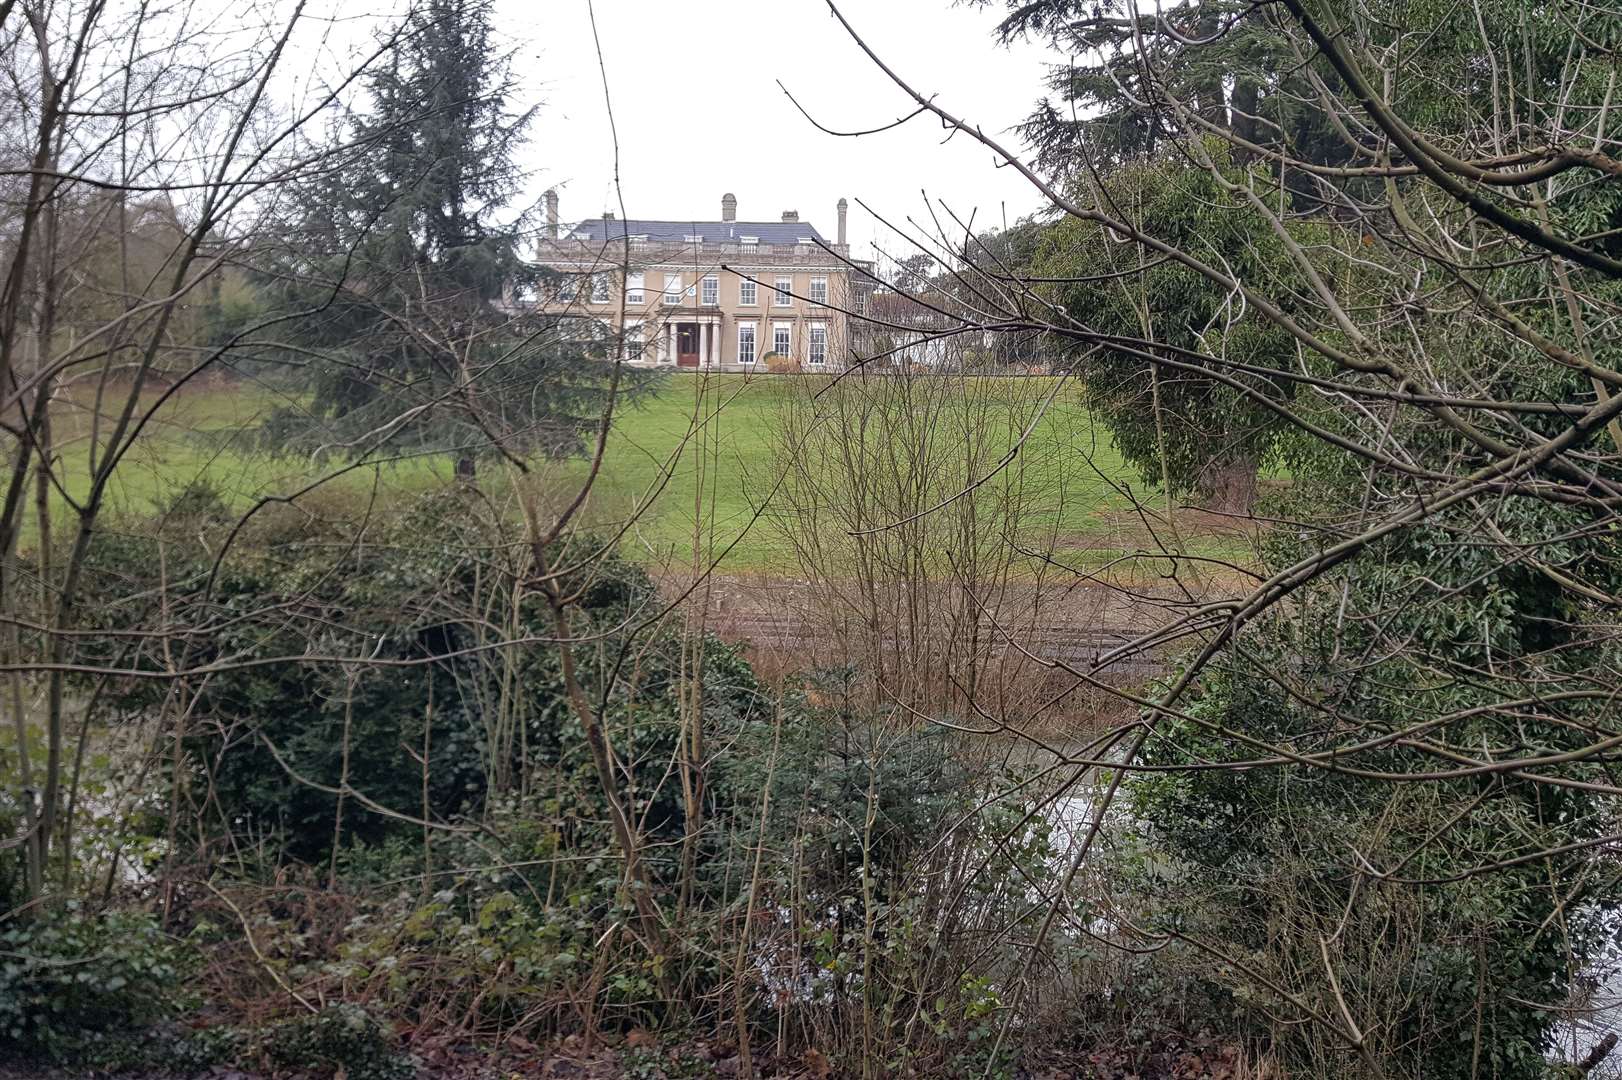 A view from the park of Douce's Manor